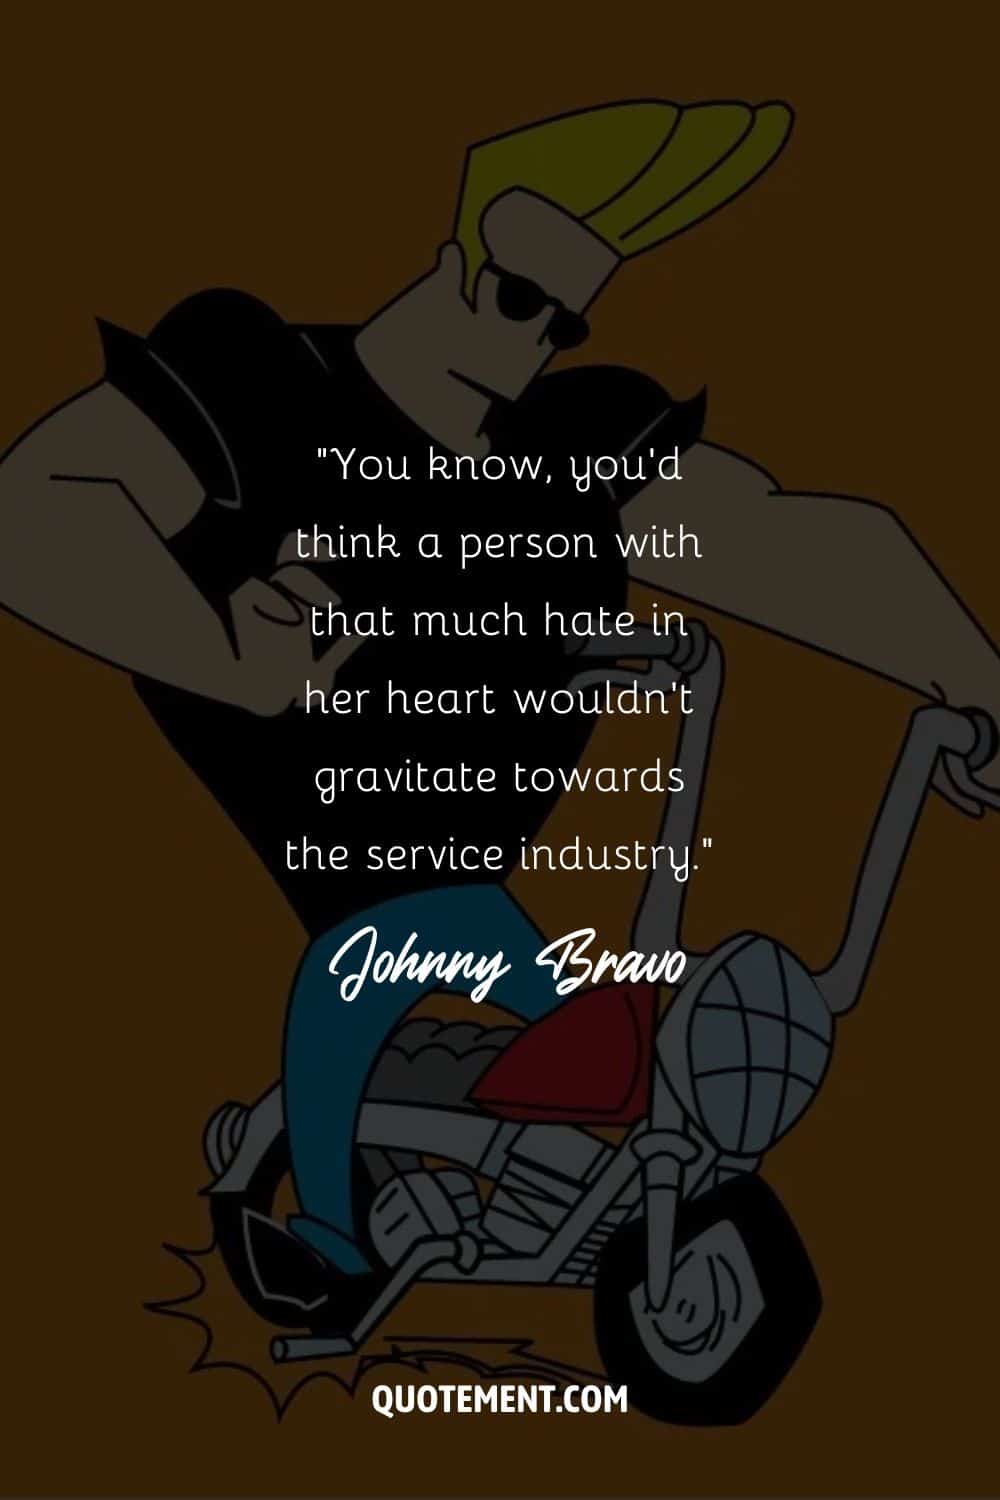 Johnny Bravo riding a motorcycle with one hand
